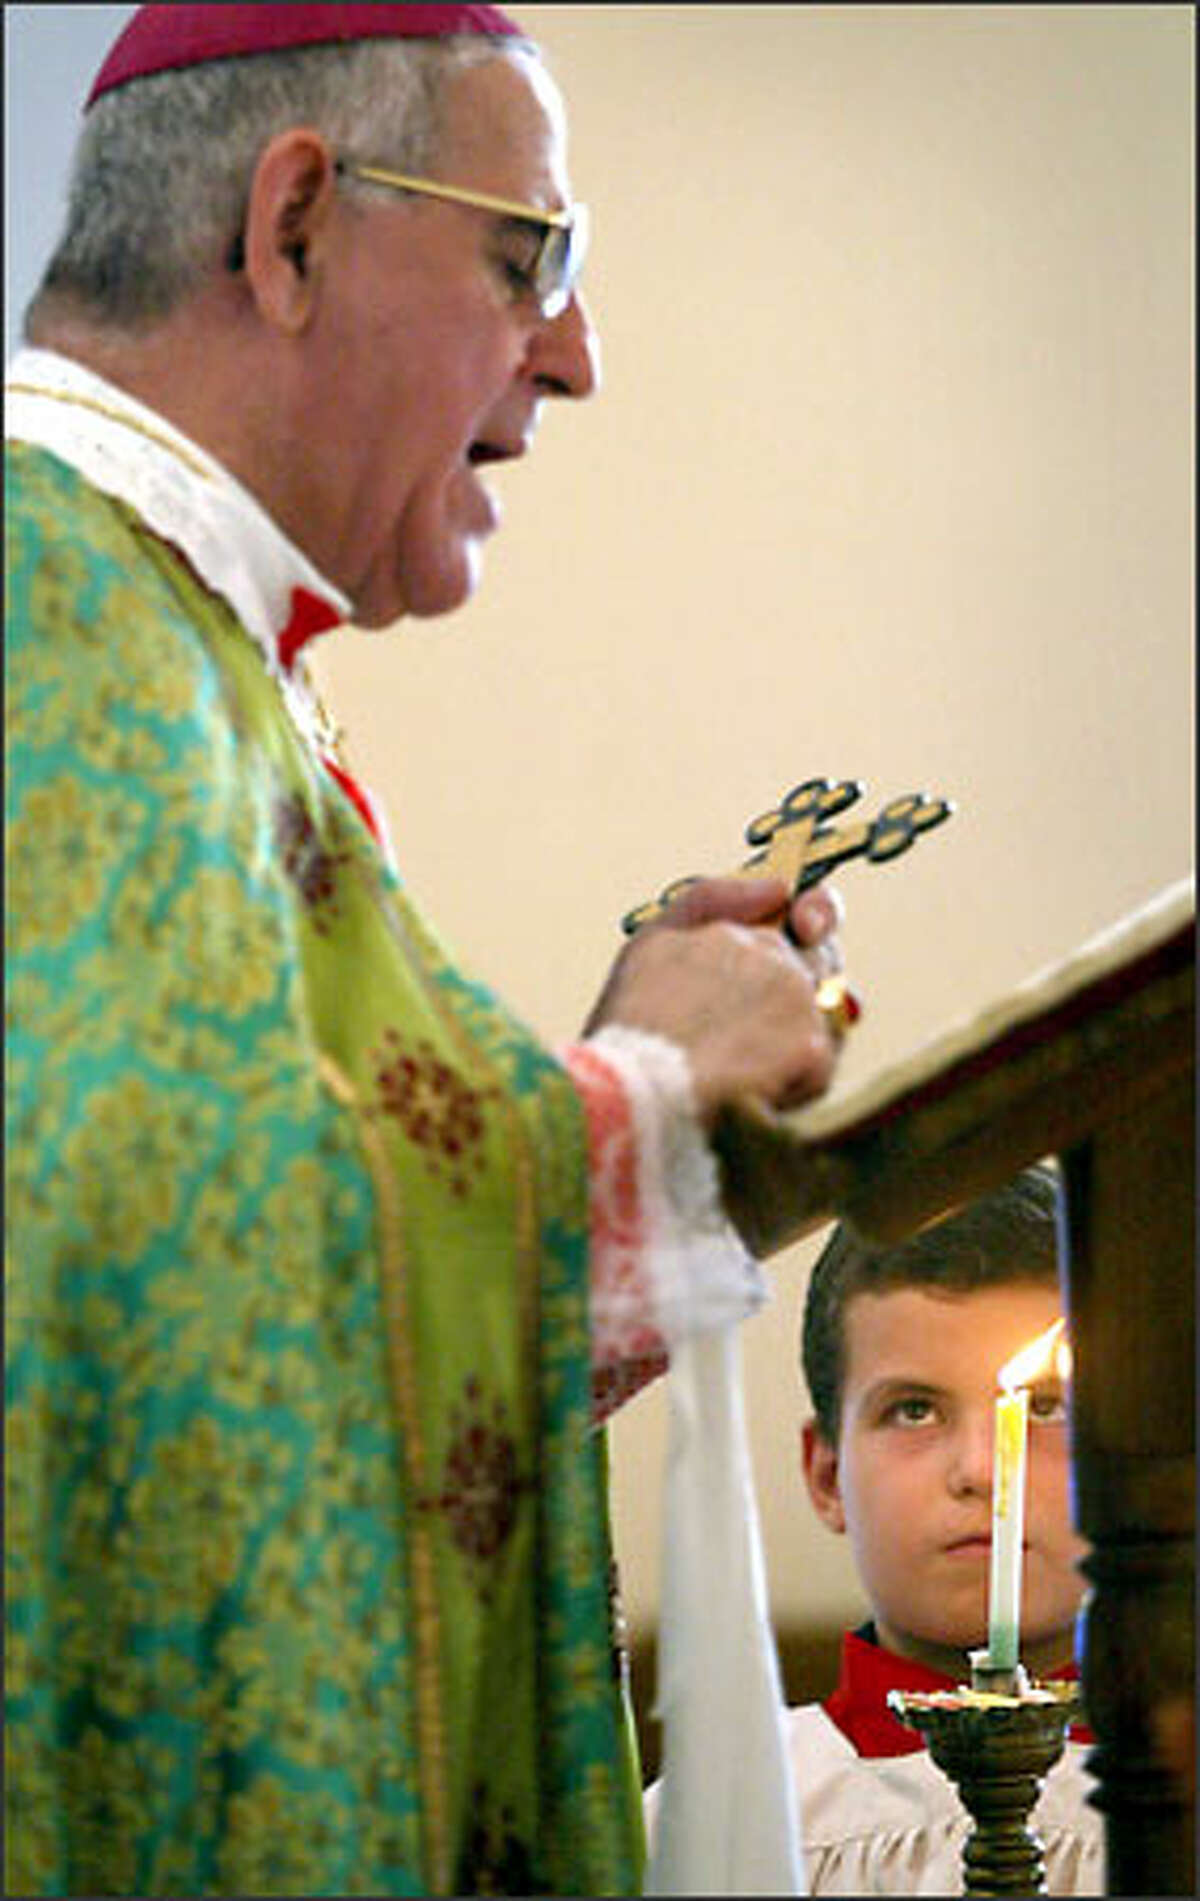 Altar boy Farj Khaleed, 11, assists Archbishop Djibrael Kassab during Mass in Basra. When war broke out in Basra, most Christians left the city, as they did in the first Gulf War. Only now some of them are returning, Kassab said.